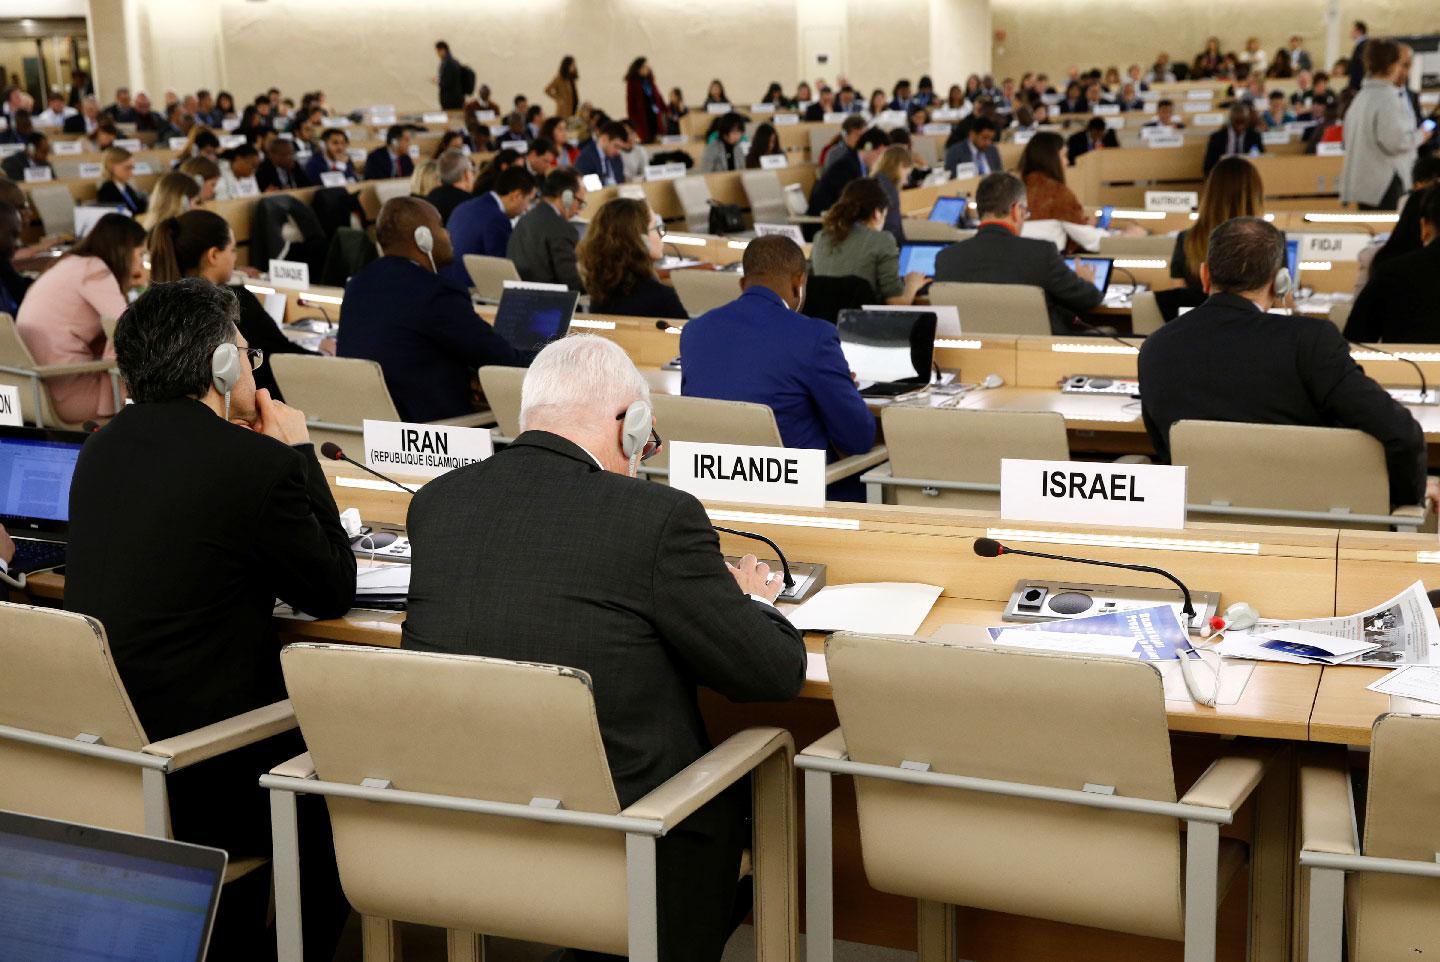 The empty seat of Israel is pictured during the report of the Commission of Inquiry on the 2018 protests in the occupied Palestinian territory during a session of the Human Rights Council at the United Nations in Geneva, Switzerland, March 18, 2019.